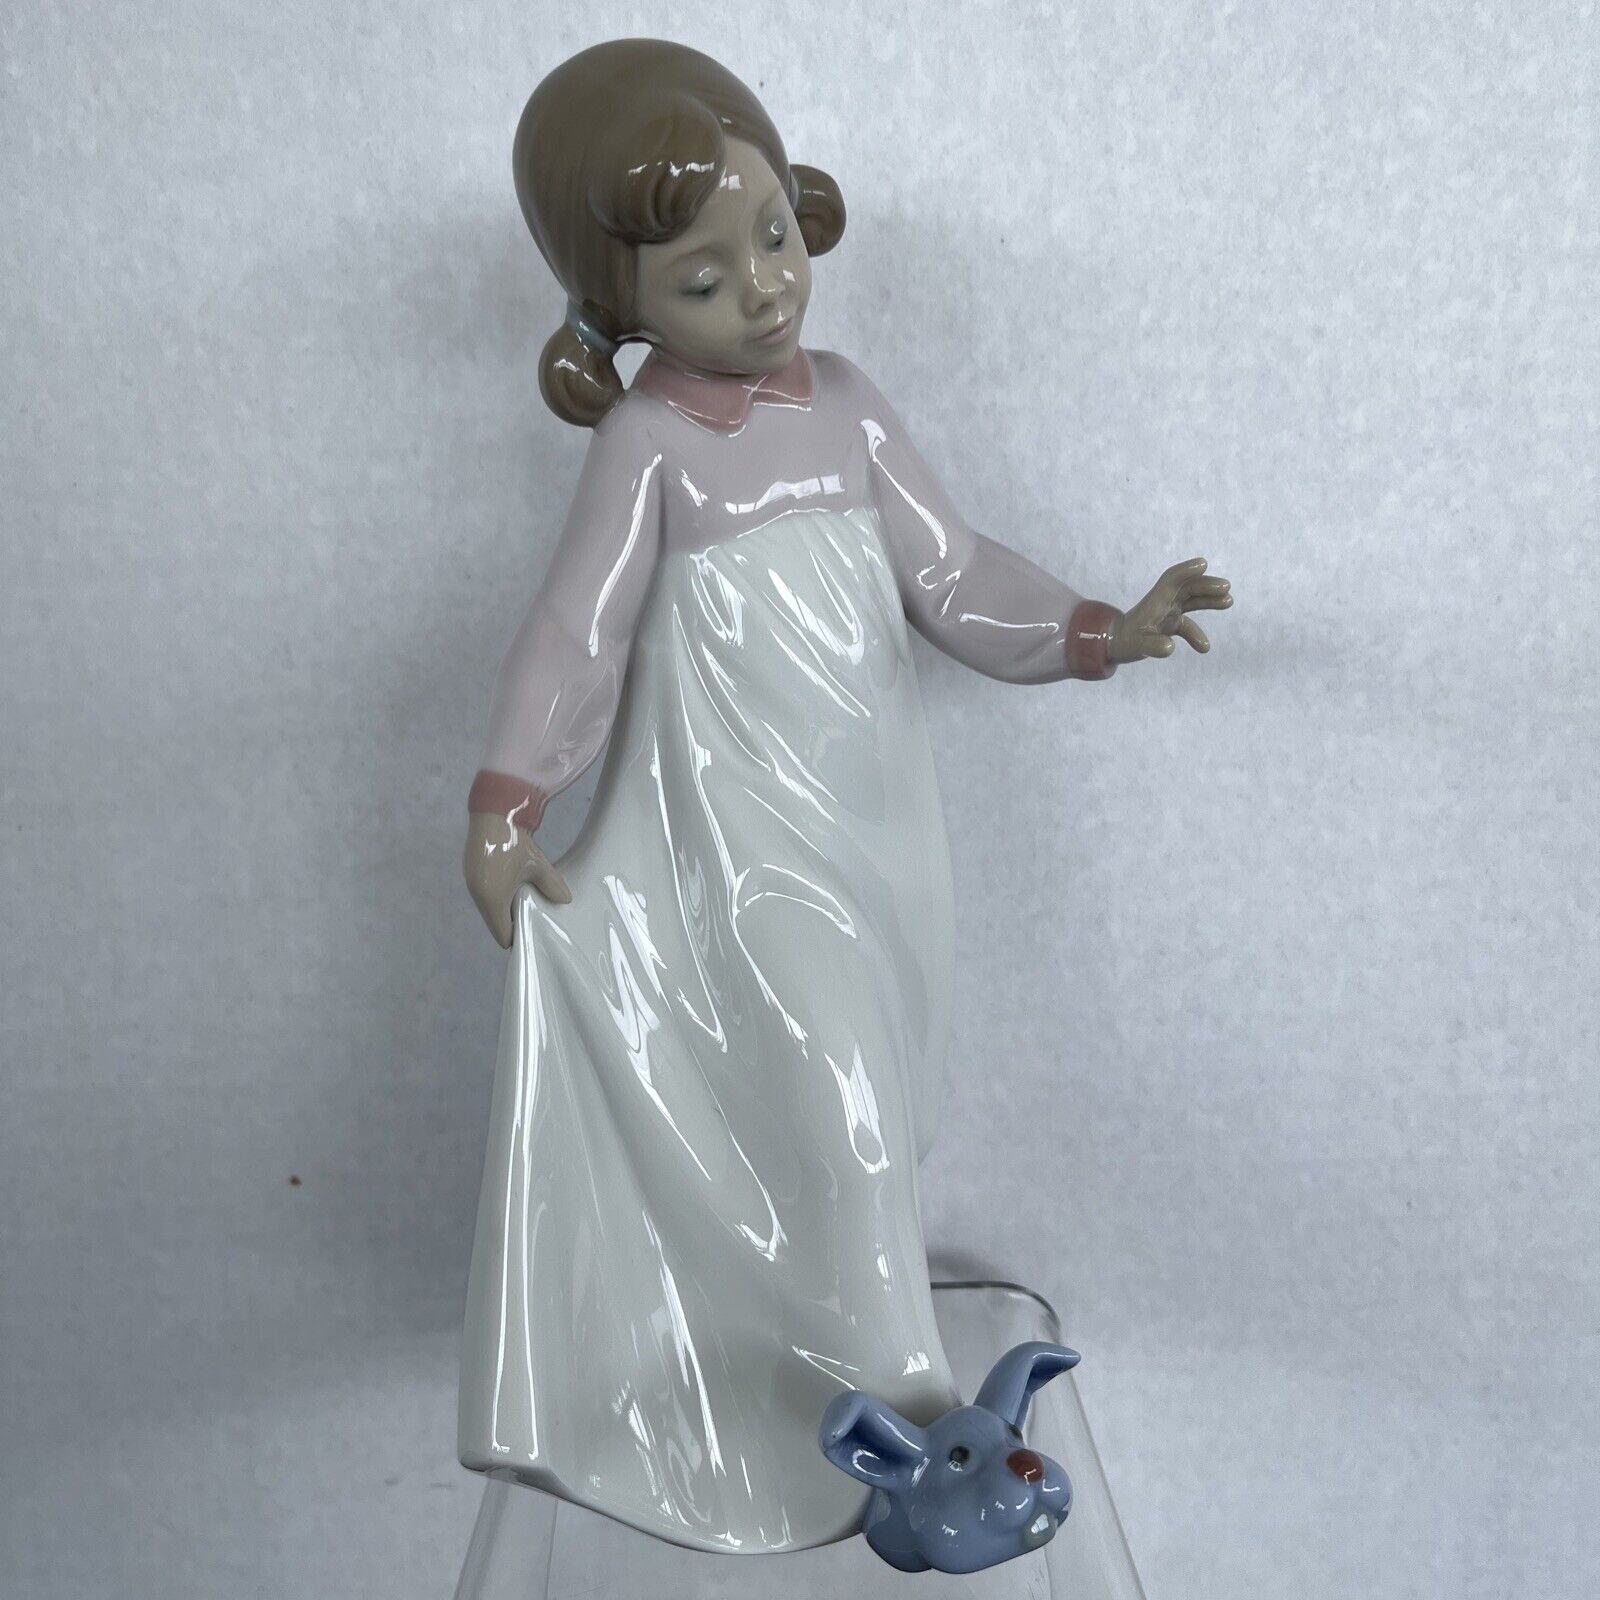 Lladro Little Girl Off to Bed with Blue Bunny Slippers #6421 Porcelain Figurine